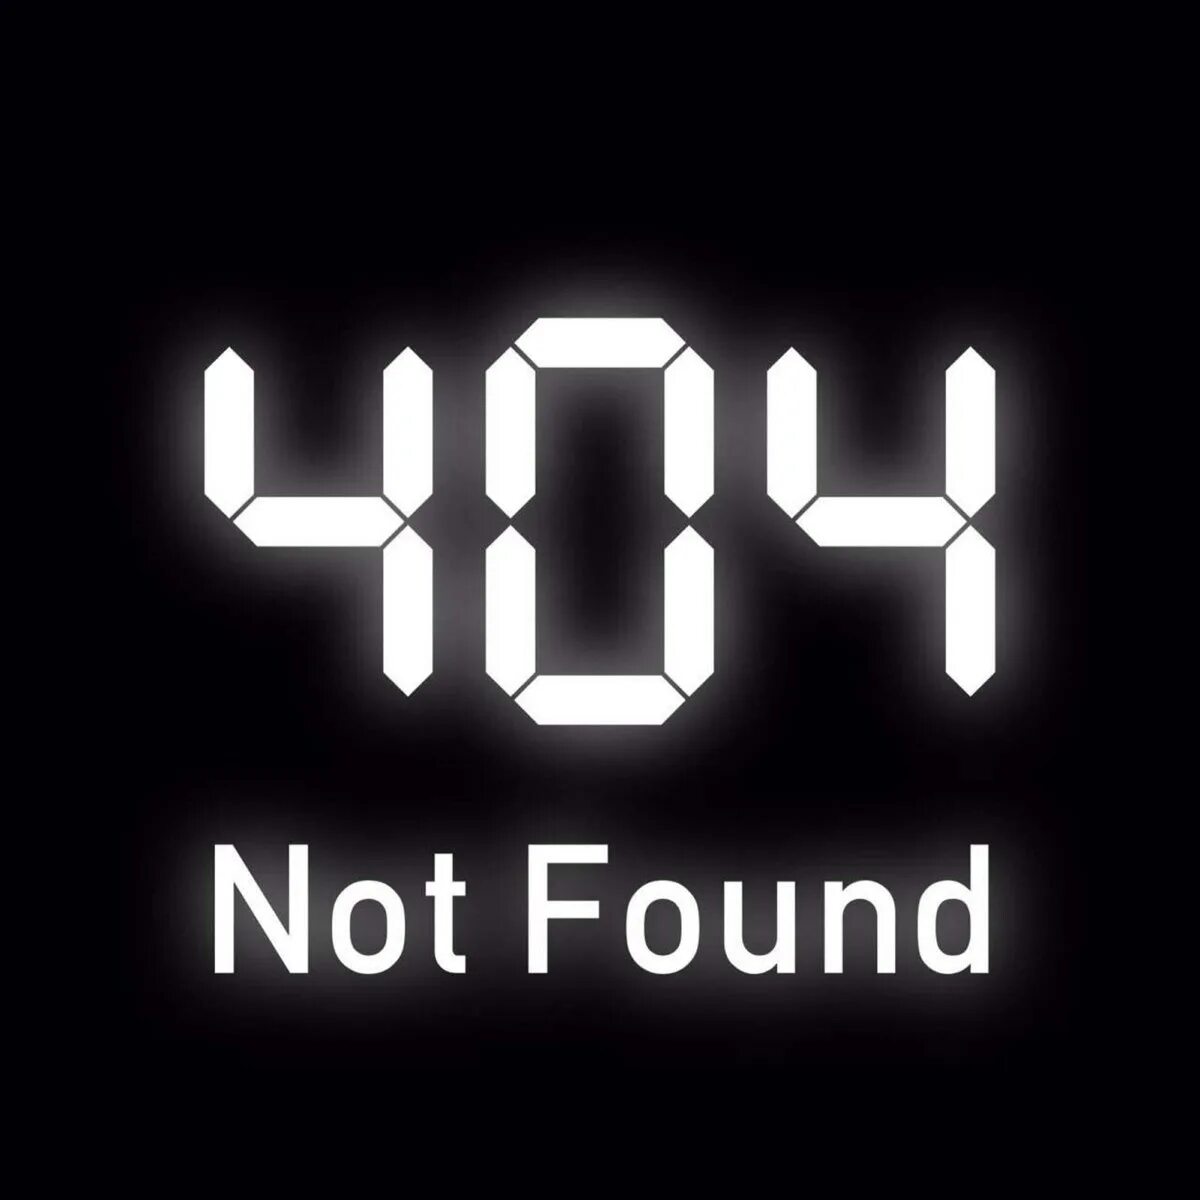 Not found. Error 404 not found. 404 Нот фаунд. Картинка not found. Product not found